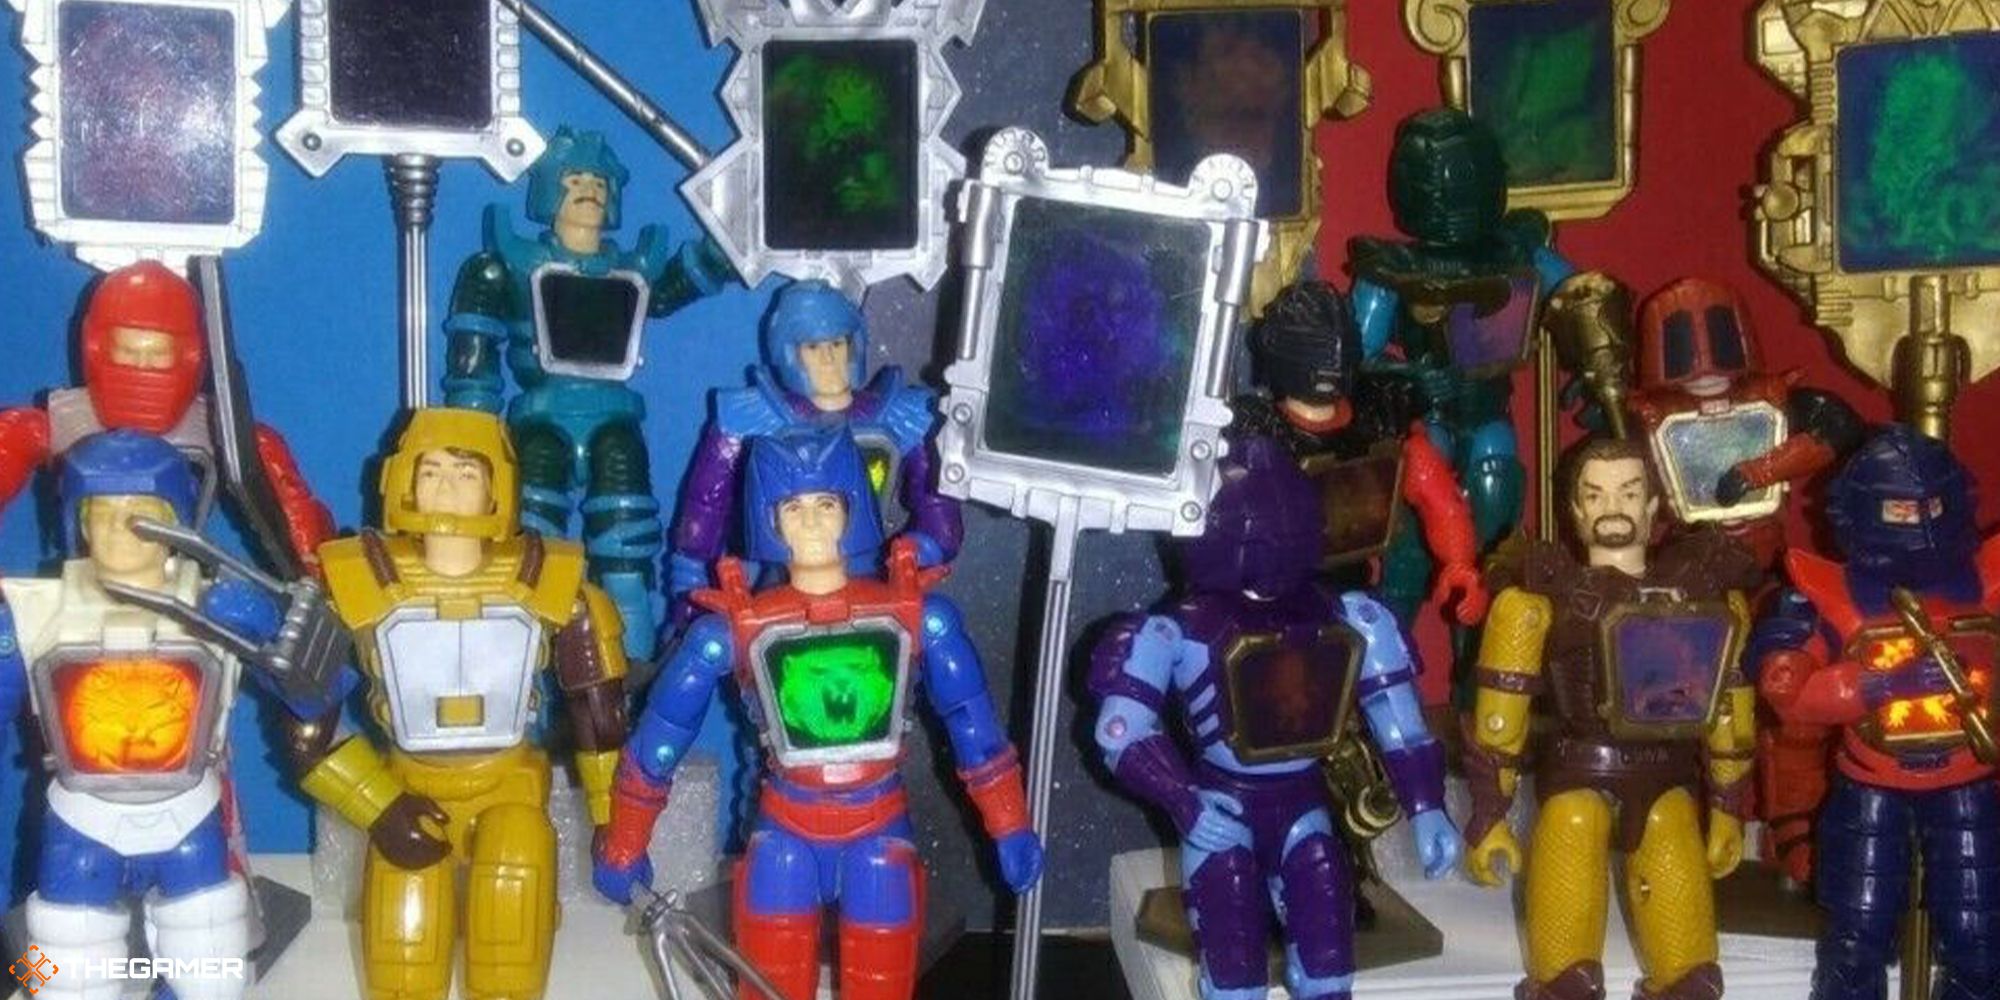 The Visionaries toys